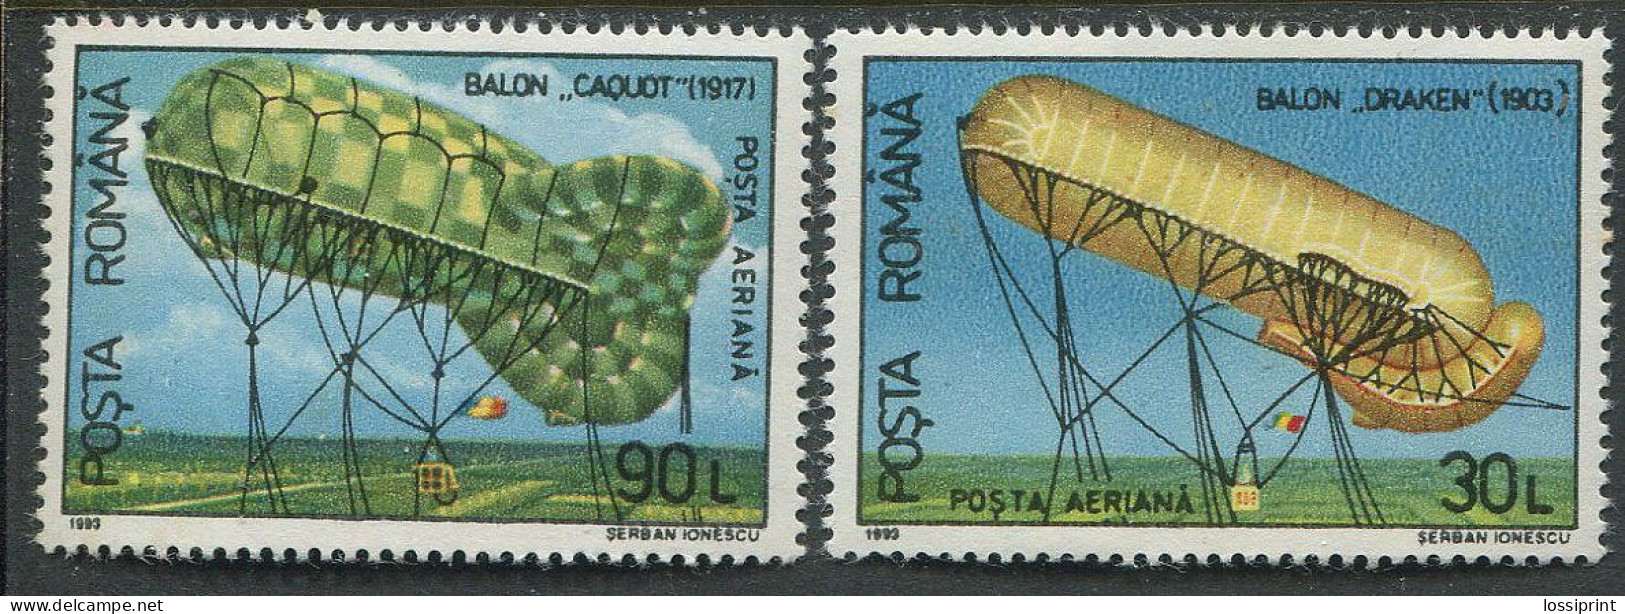 Romania:Unused Stamps Balloons, 1993, MNH - Zeppelins